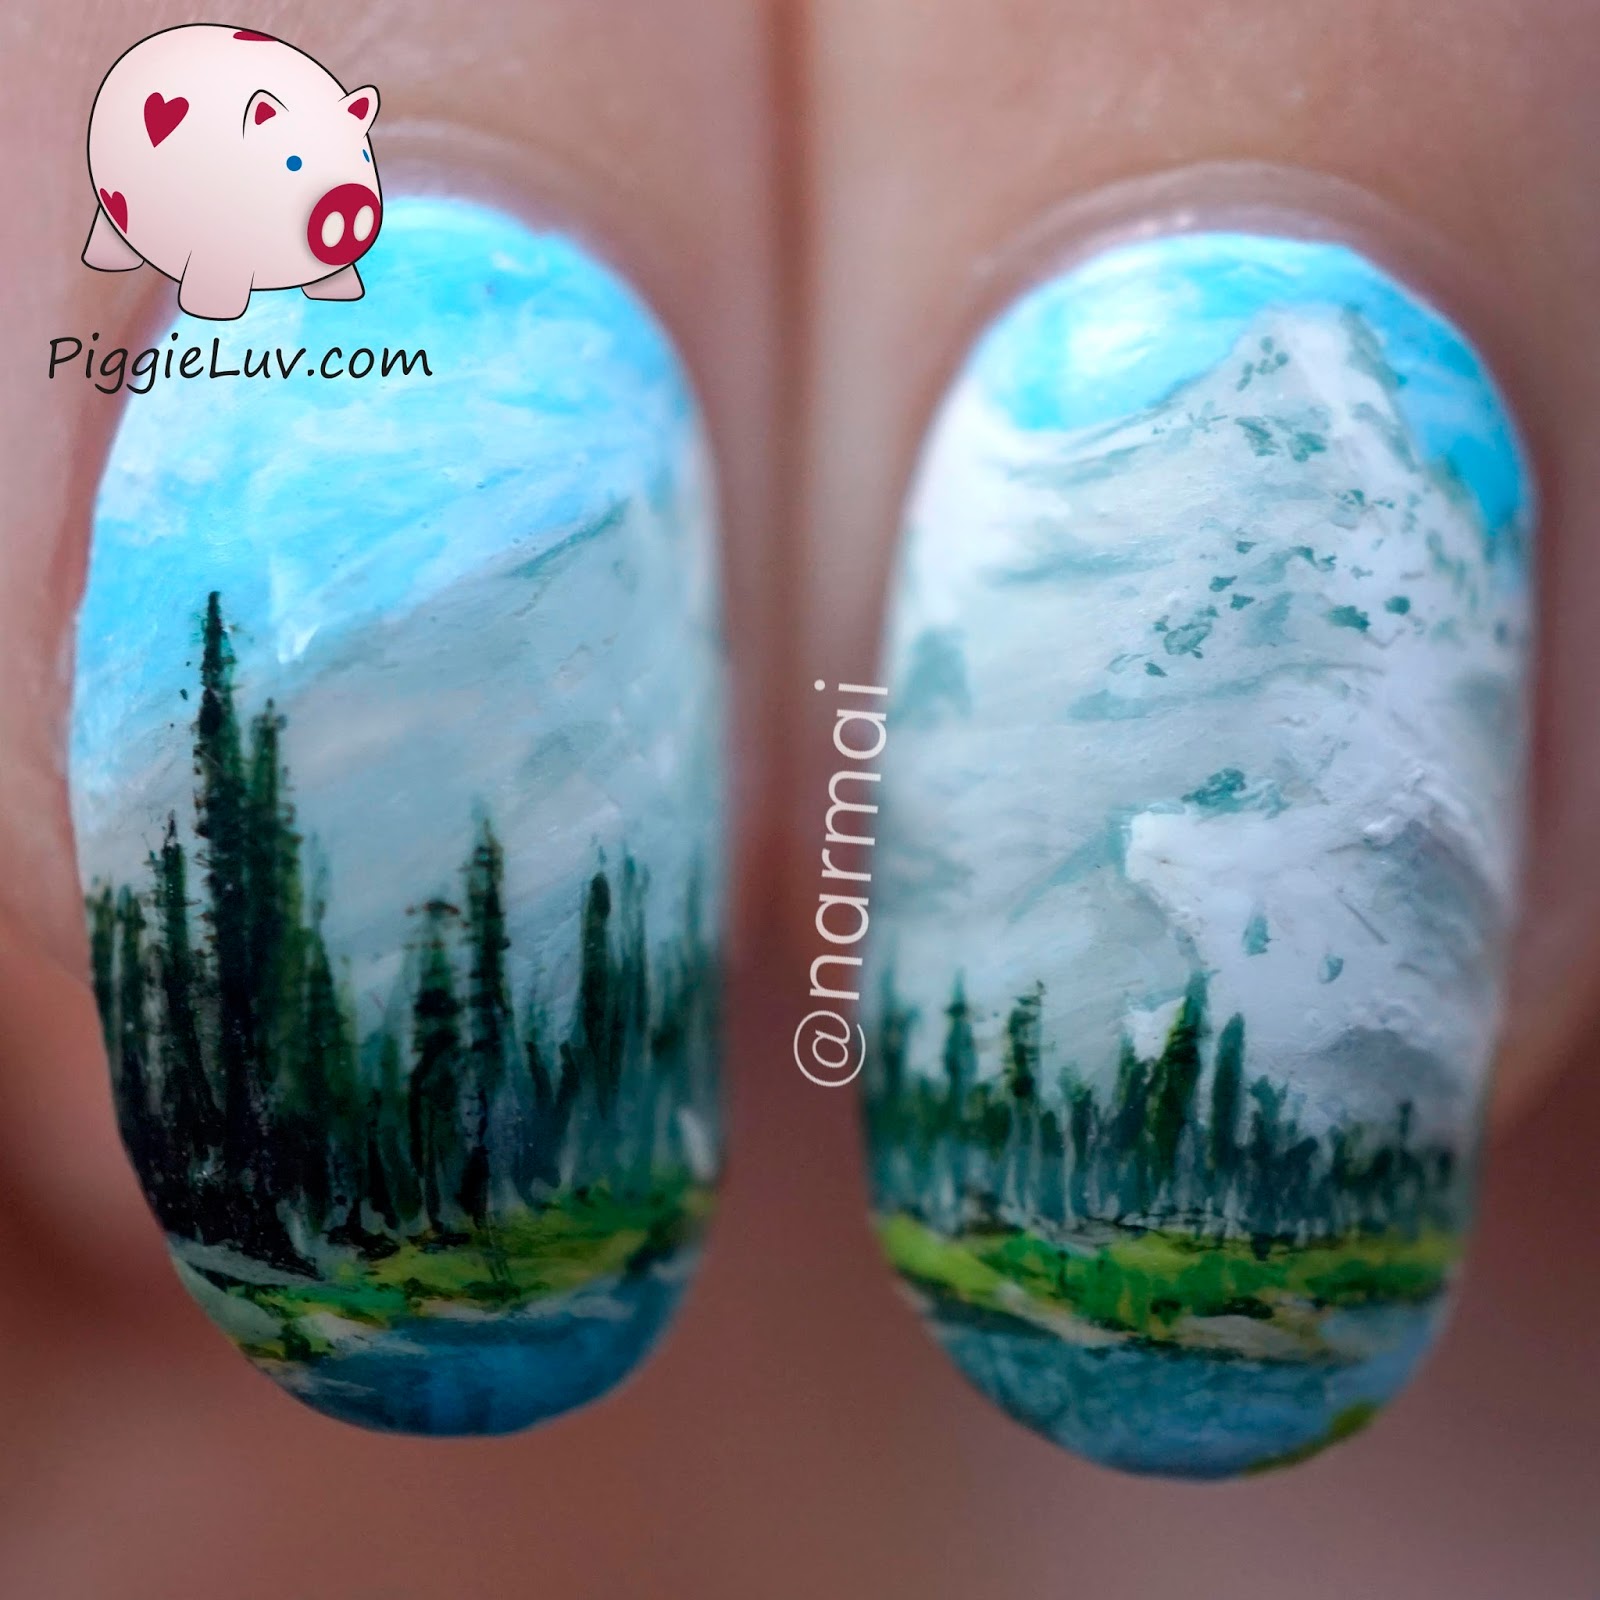 PiggieLuv: Nail art inspired by a Bob Ross painting